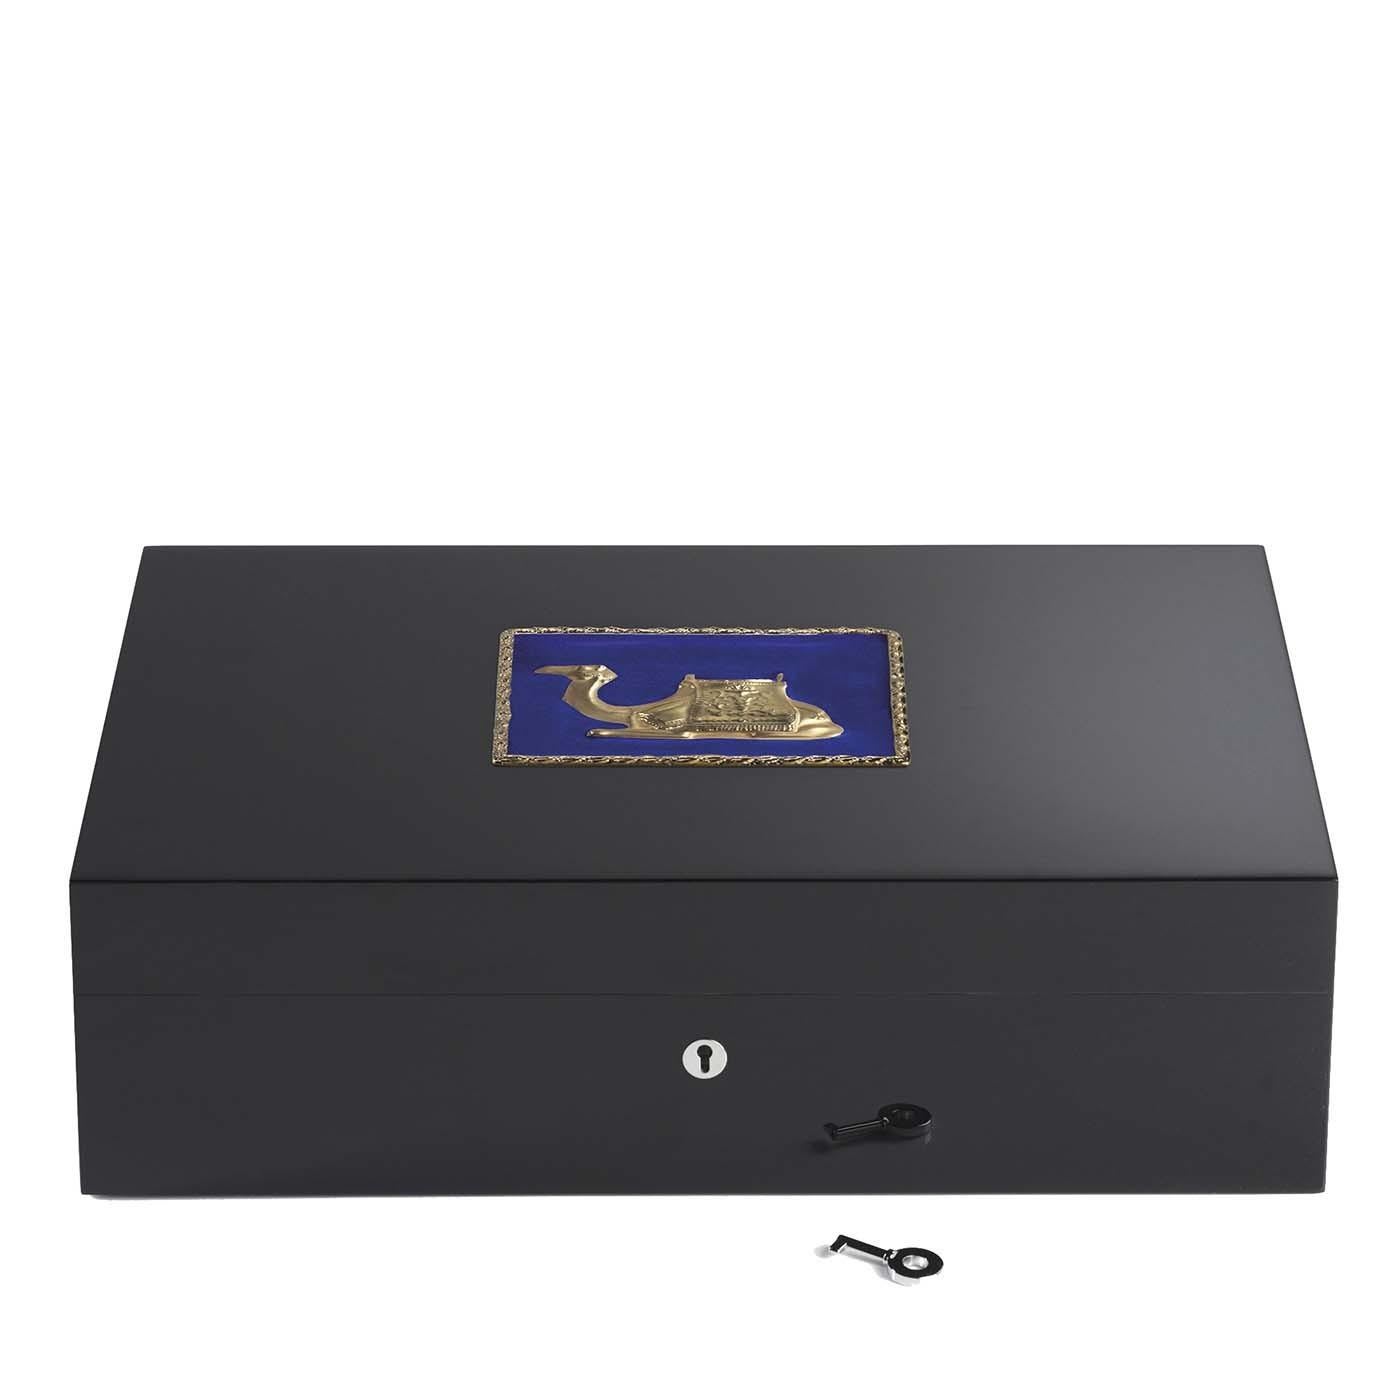 An exquisite example of Italian craftsmanship, this wooden humidor boasts a square decoration on the lid portraying a finely depicted camel on a blue background. The golden edges framing the decoration share with the camel the same luminous finish.